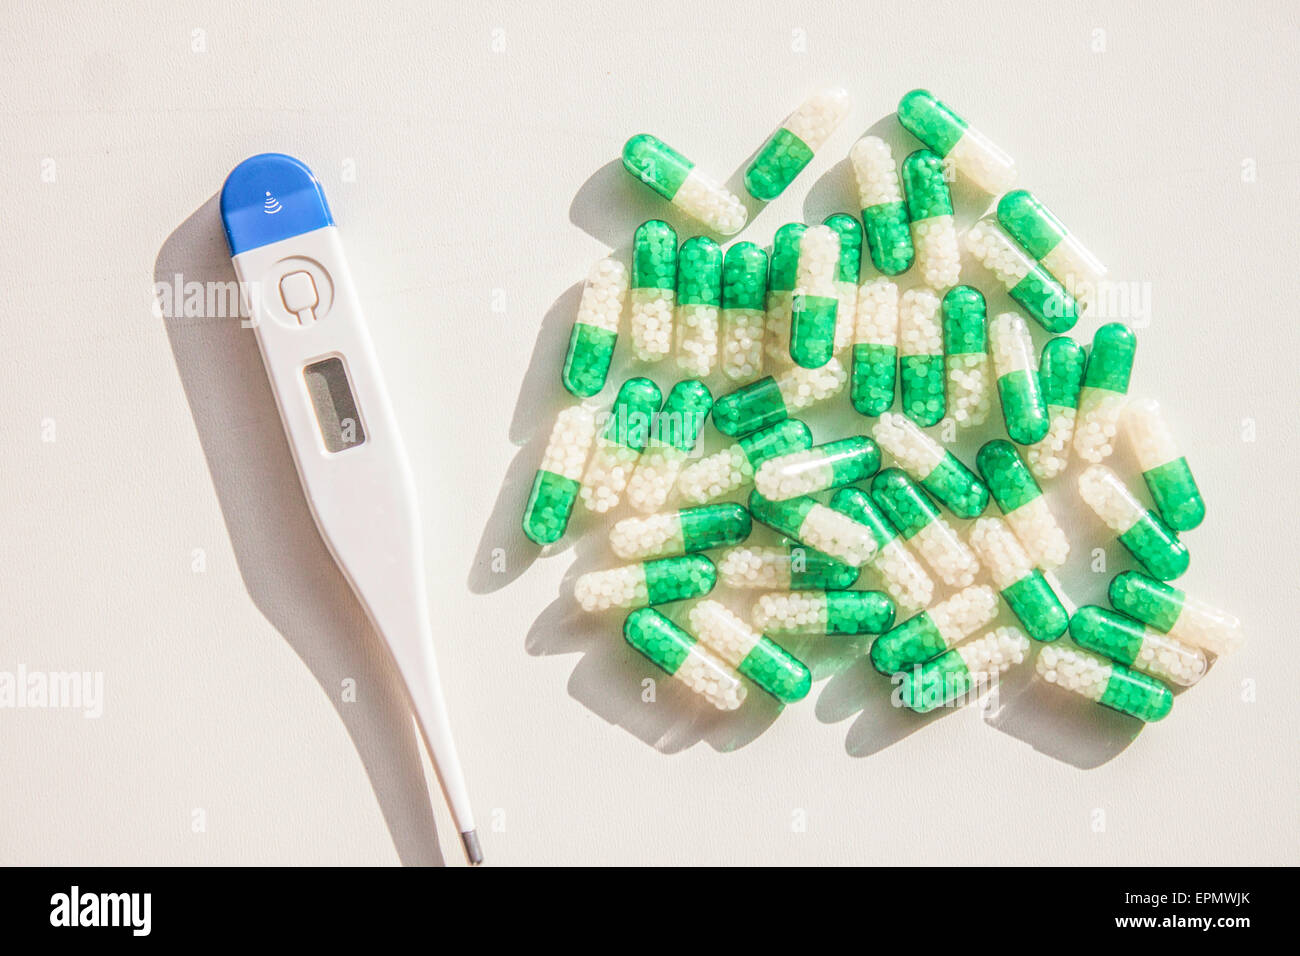 Blue - white thermometer and green - white pills Stock Photo